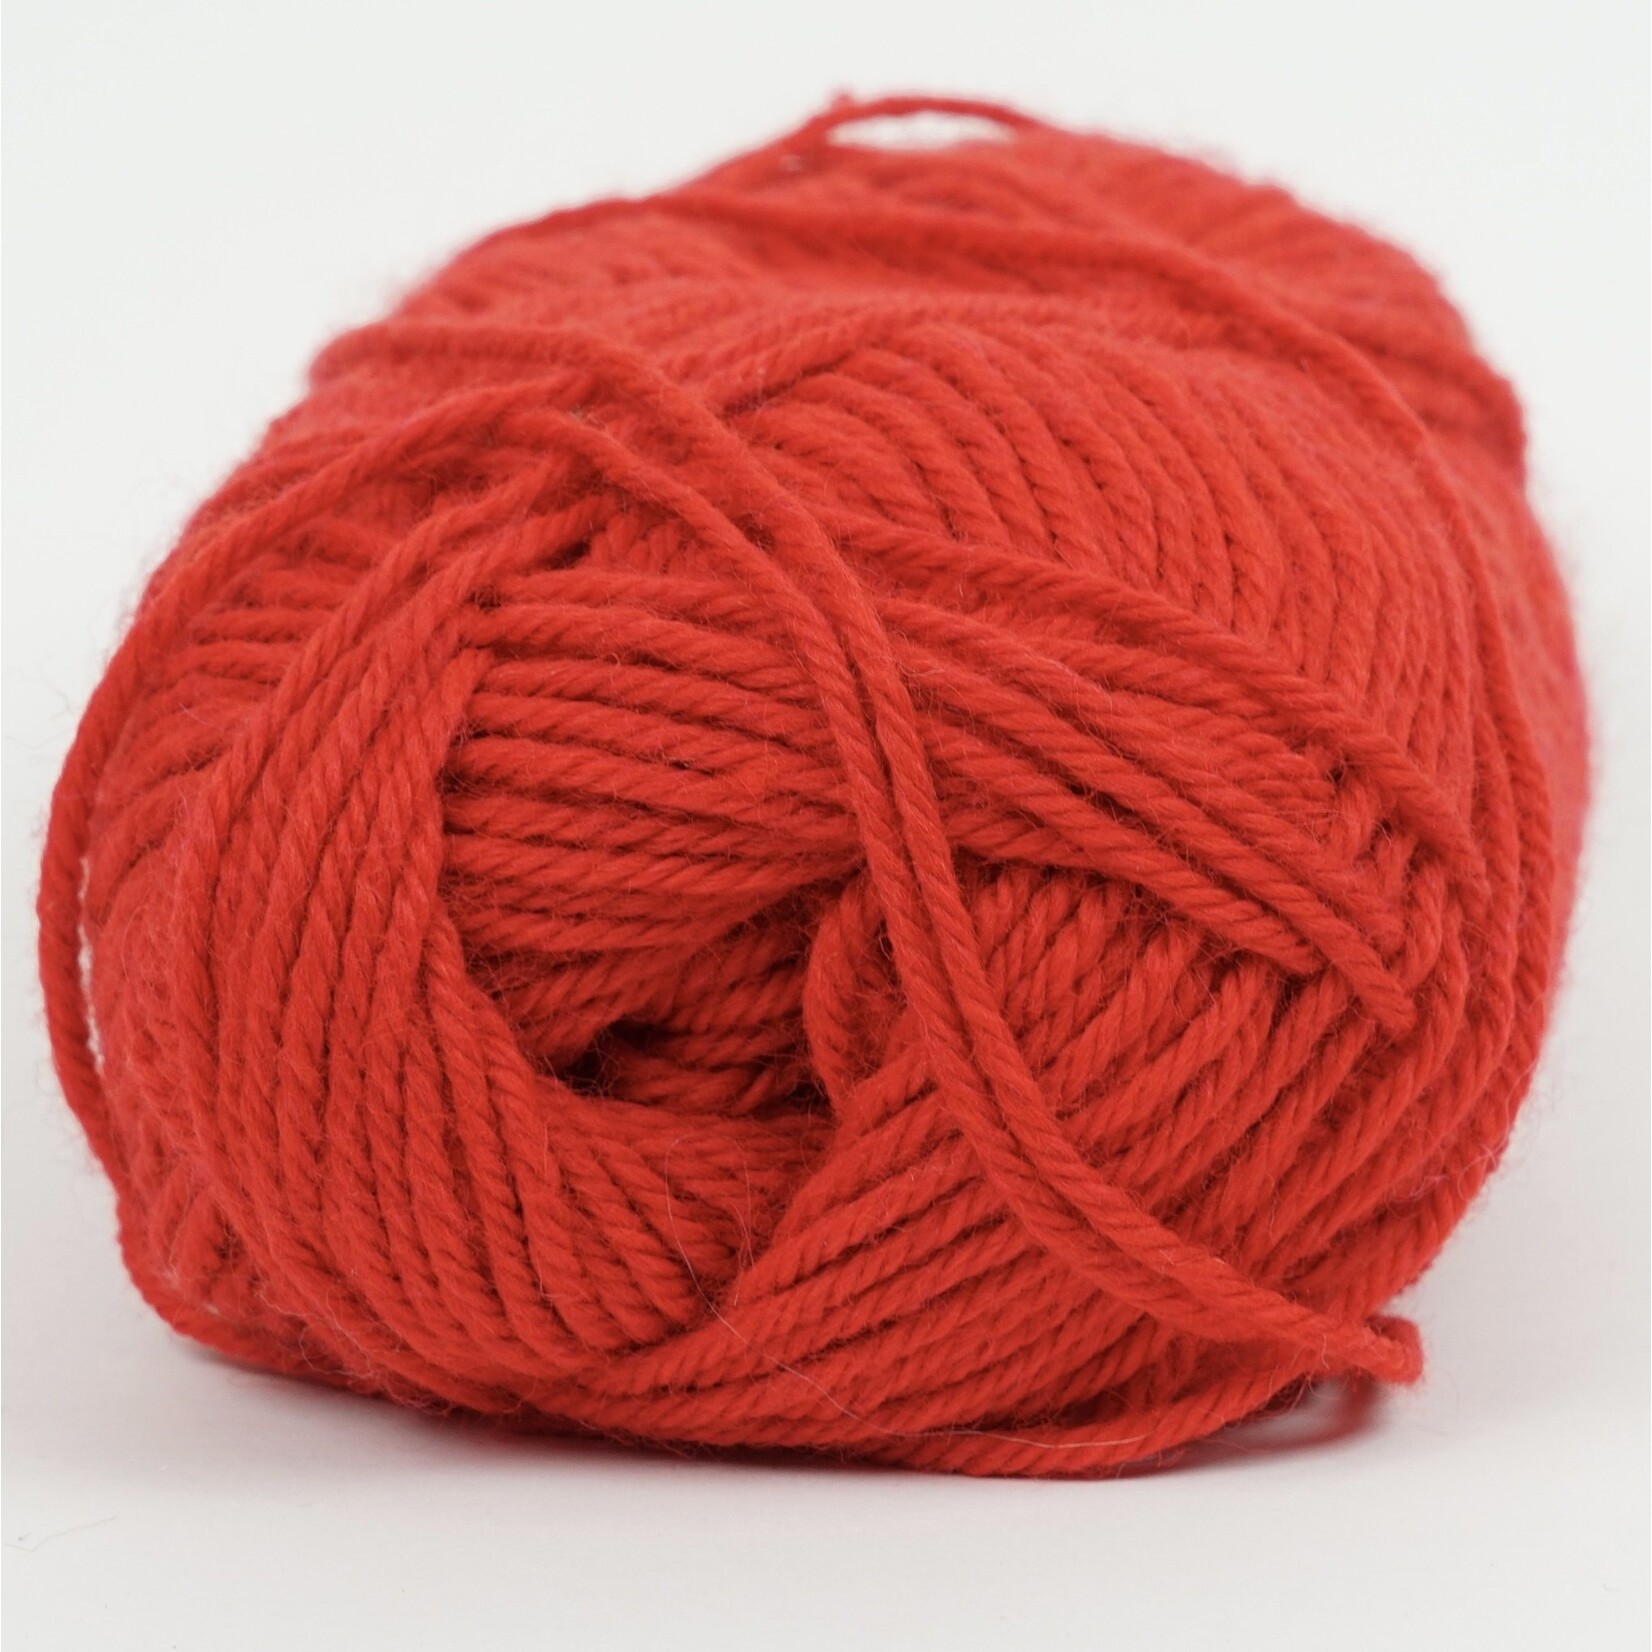 Kraemer Yarns Yarn - Perfection Worsted Flame Red